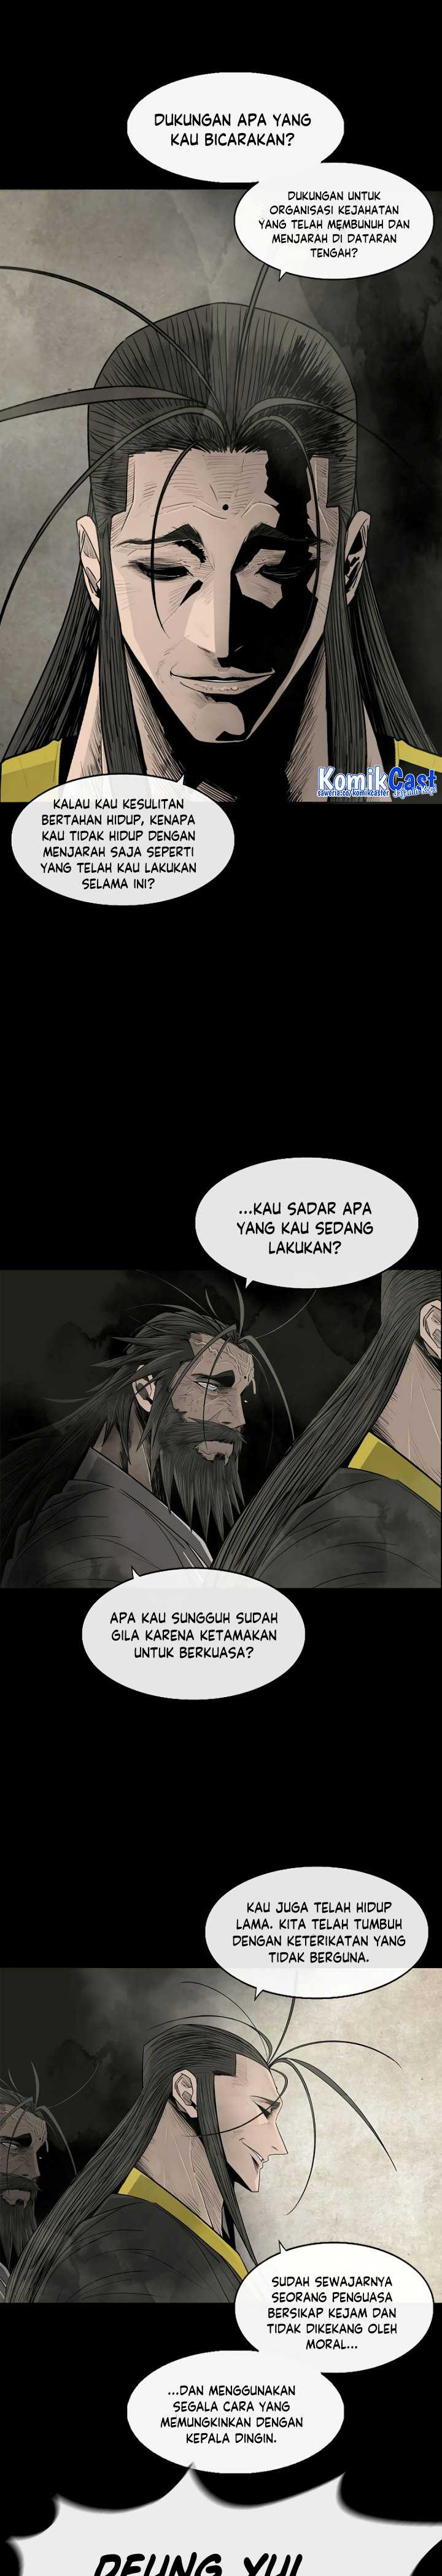 Legend of the Northern Blade Chapter 178